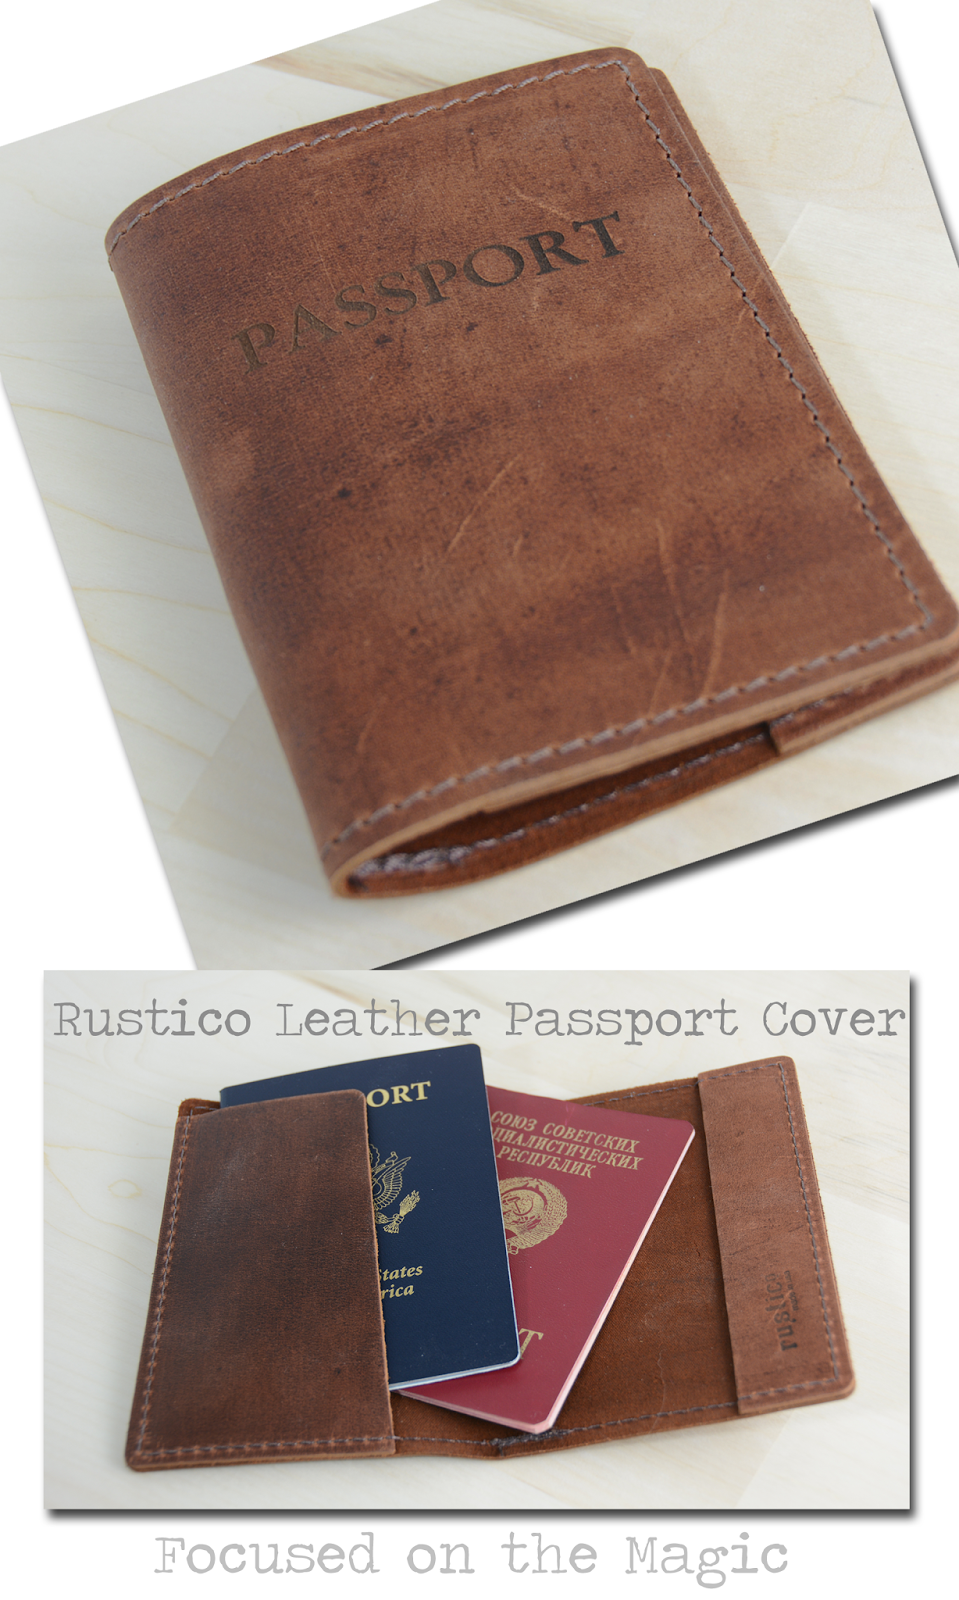 The Rustico leather Passport Cover 